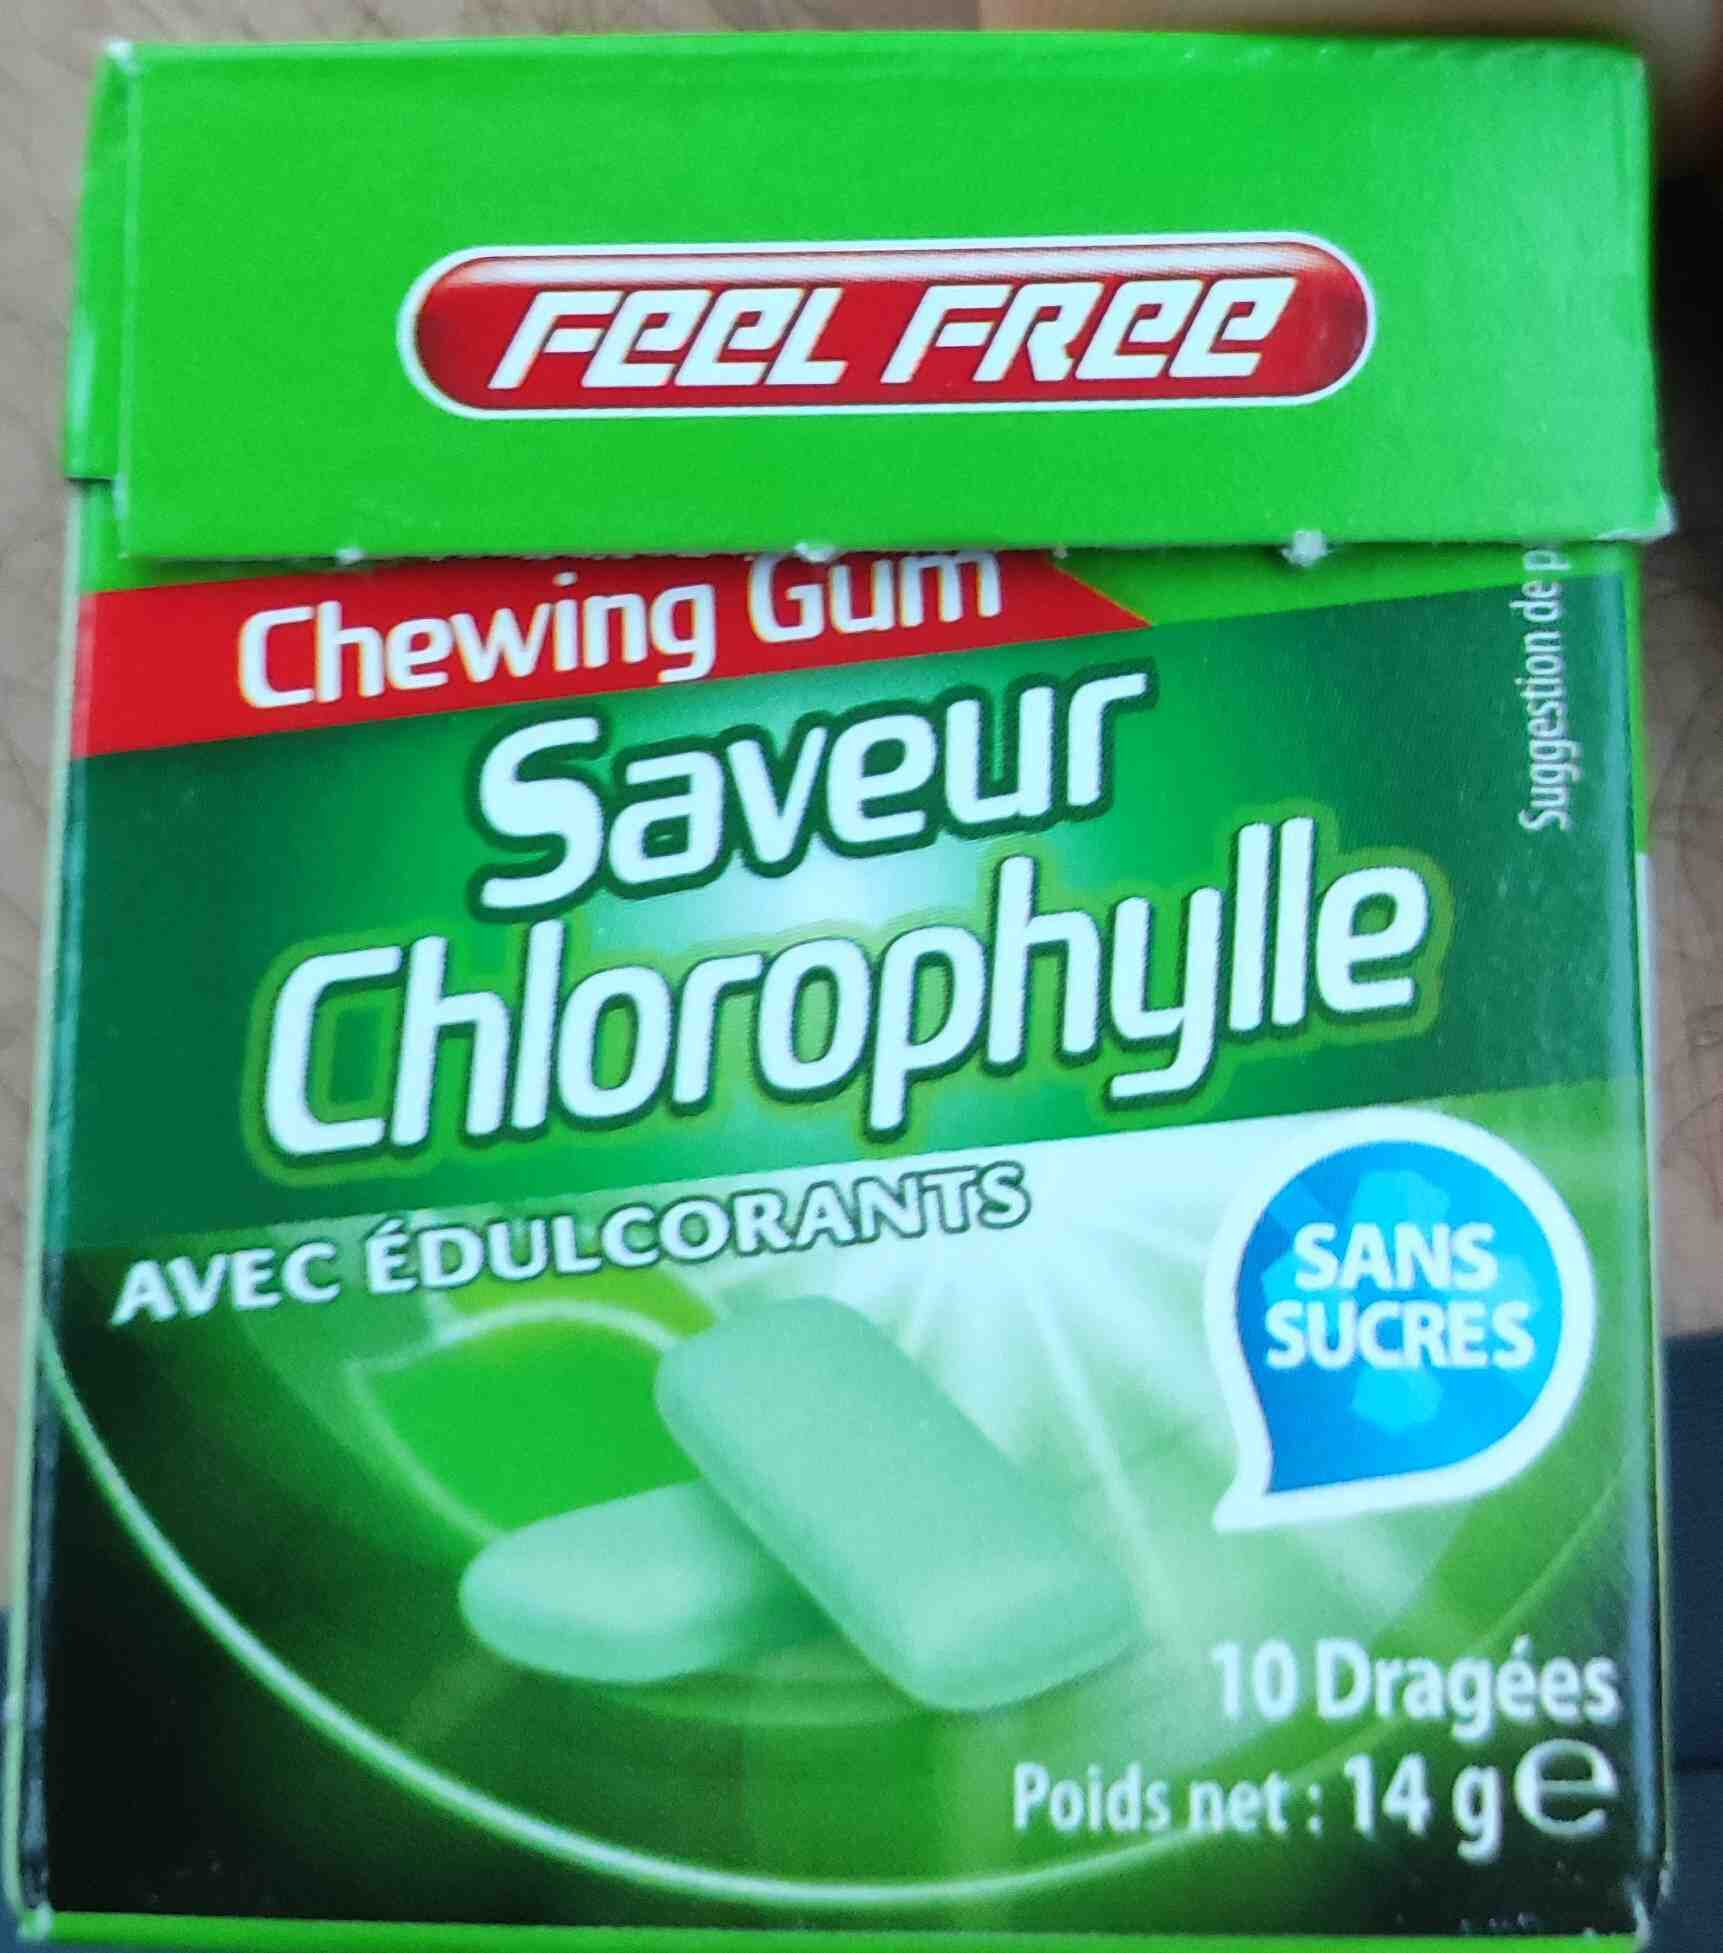 Feel Free Saveur Chlorophylle - Product